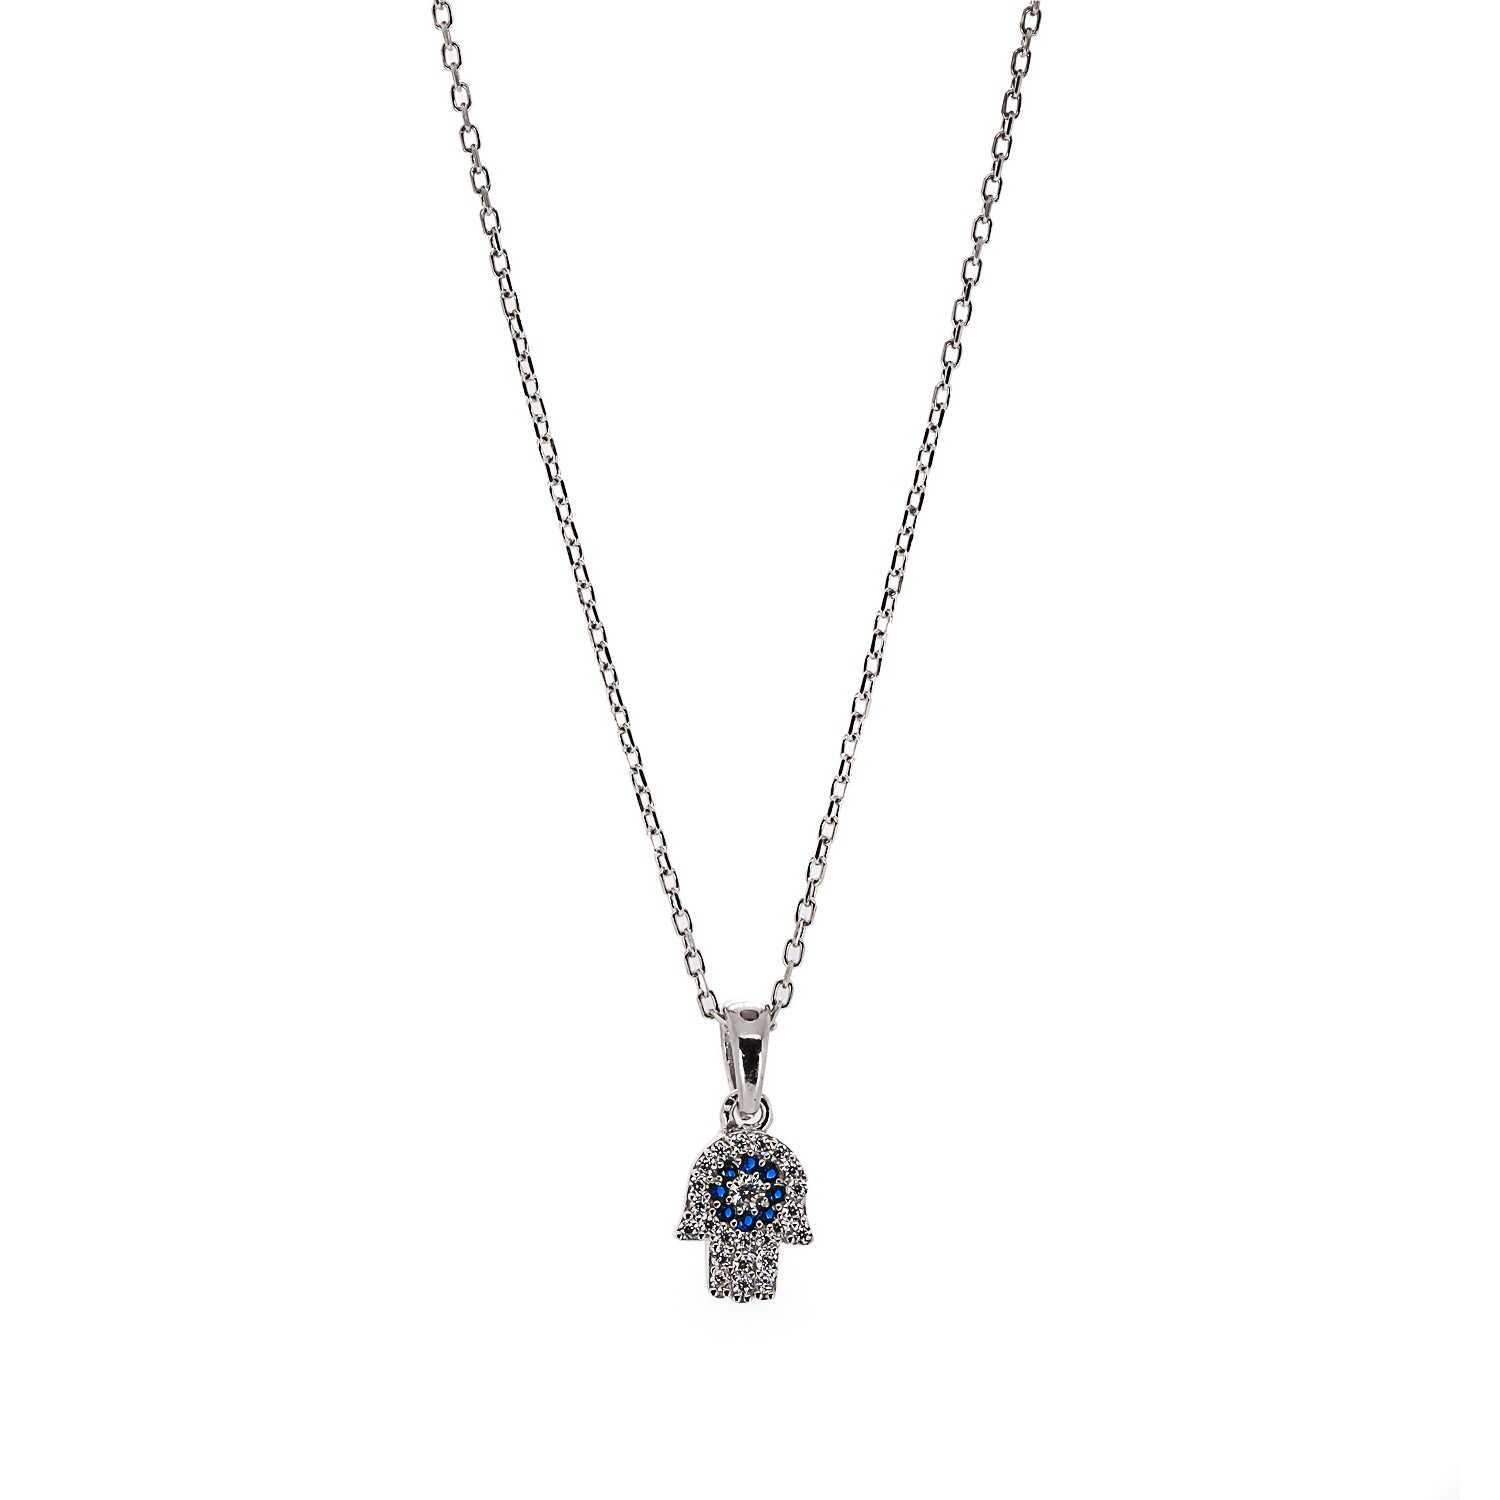 Minimalist Hamsa Hand Necklace in Silver - Perfect for Daily Wear or Gifting.